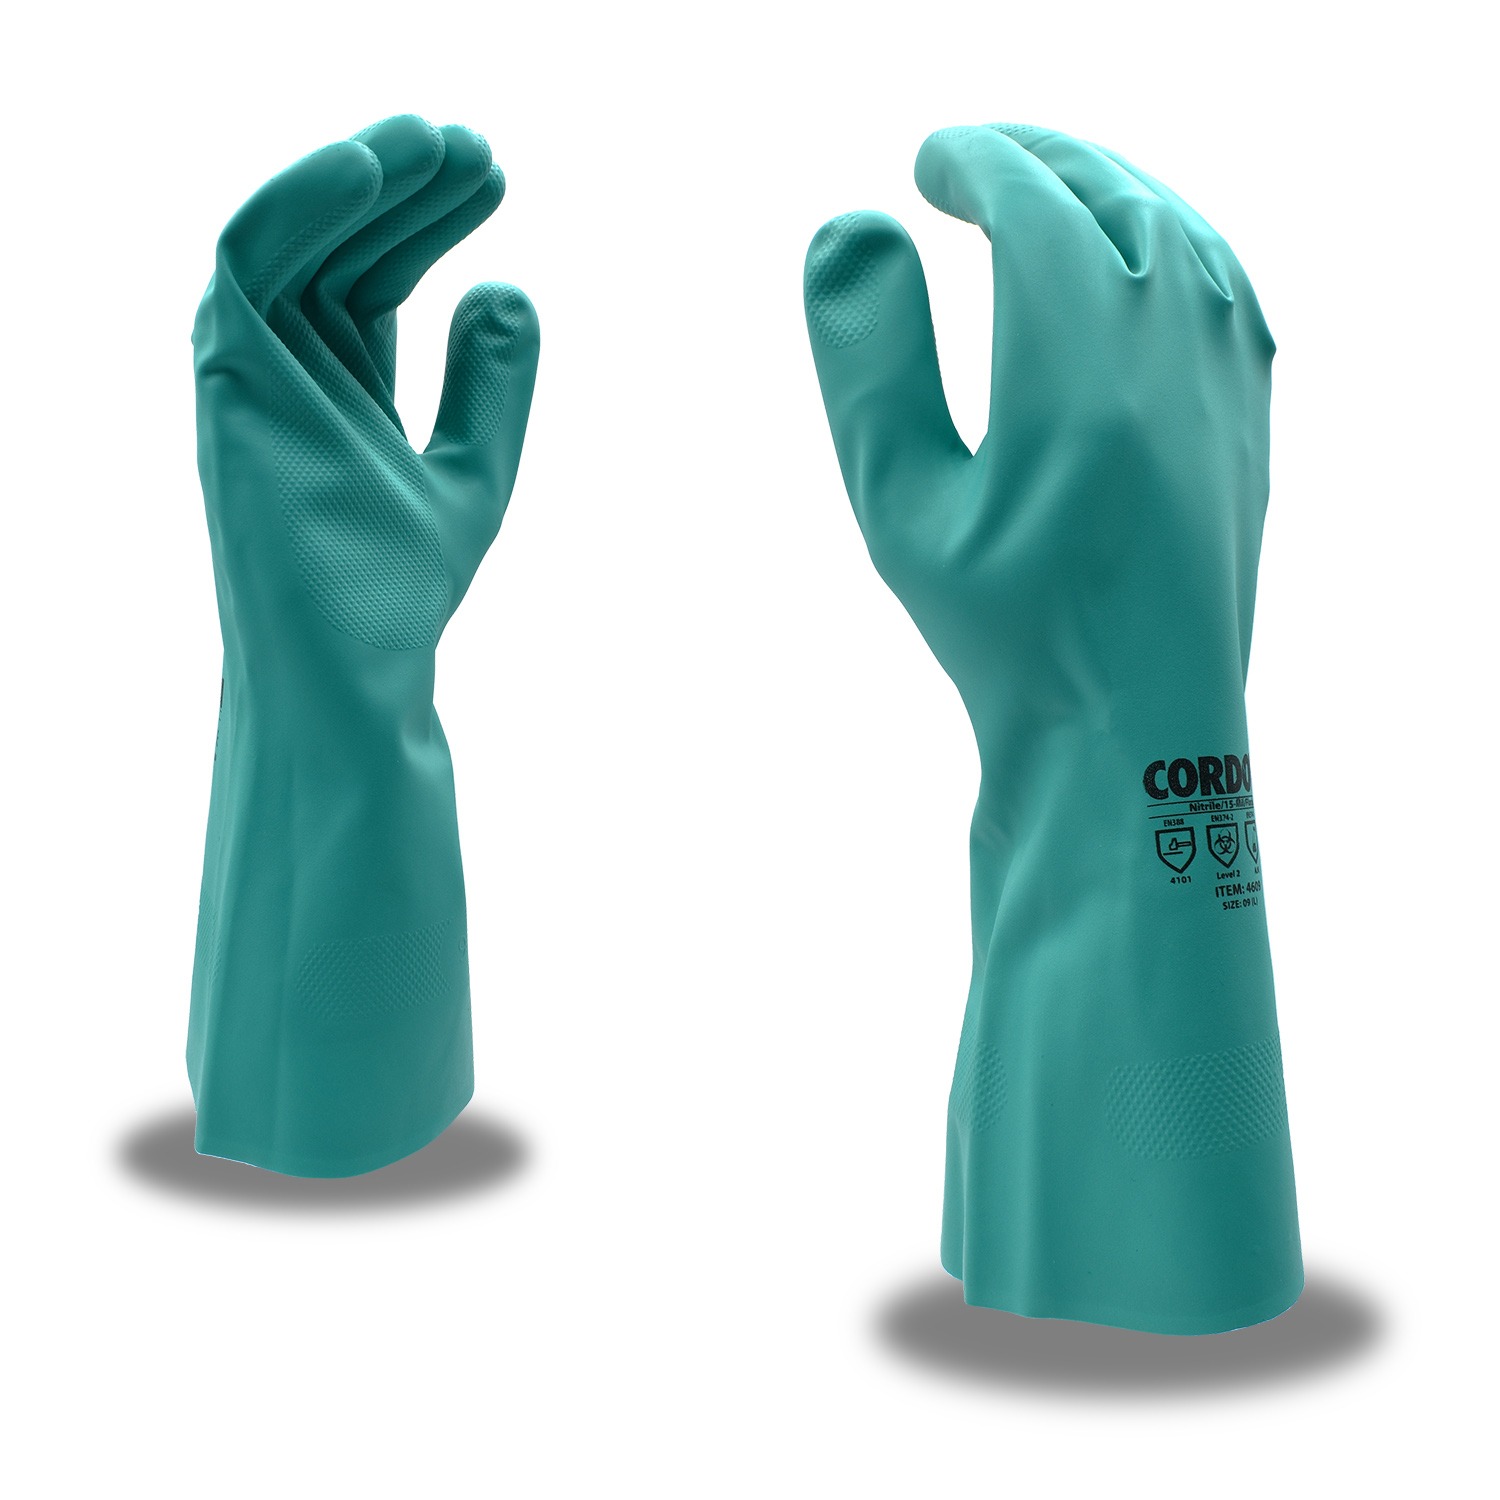 Cordova Safety Products Chemical Resistant Gloves 1164224/DZ